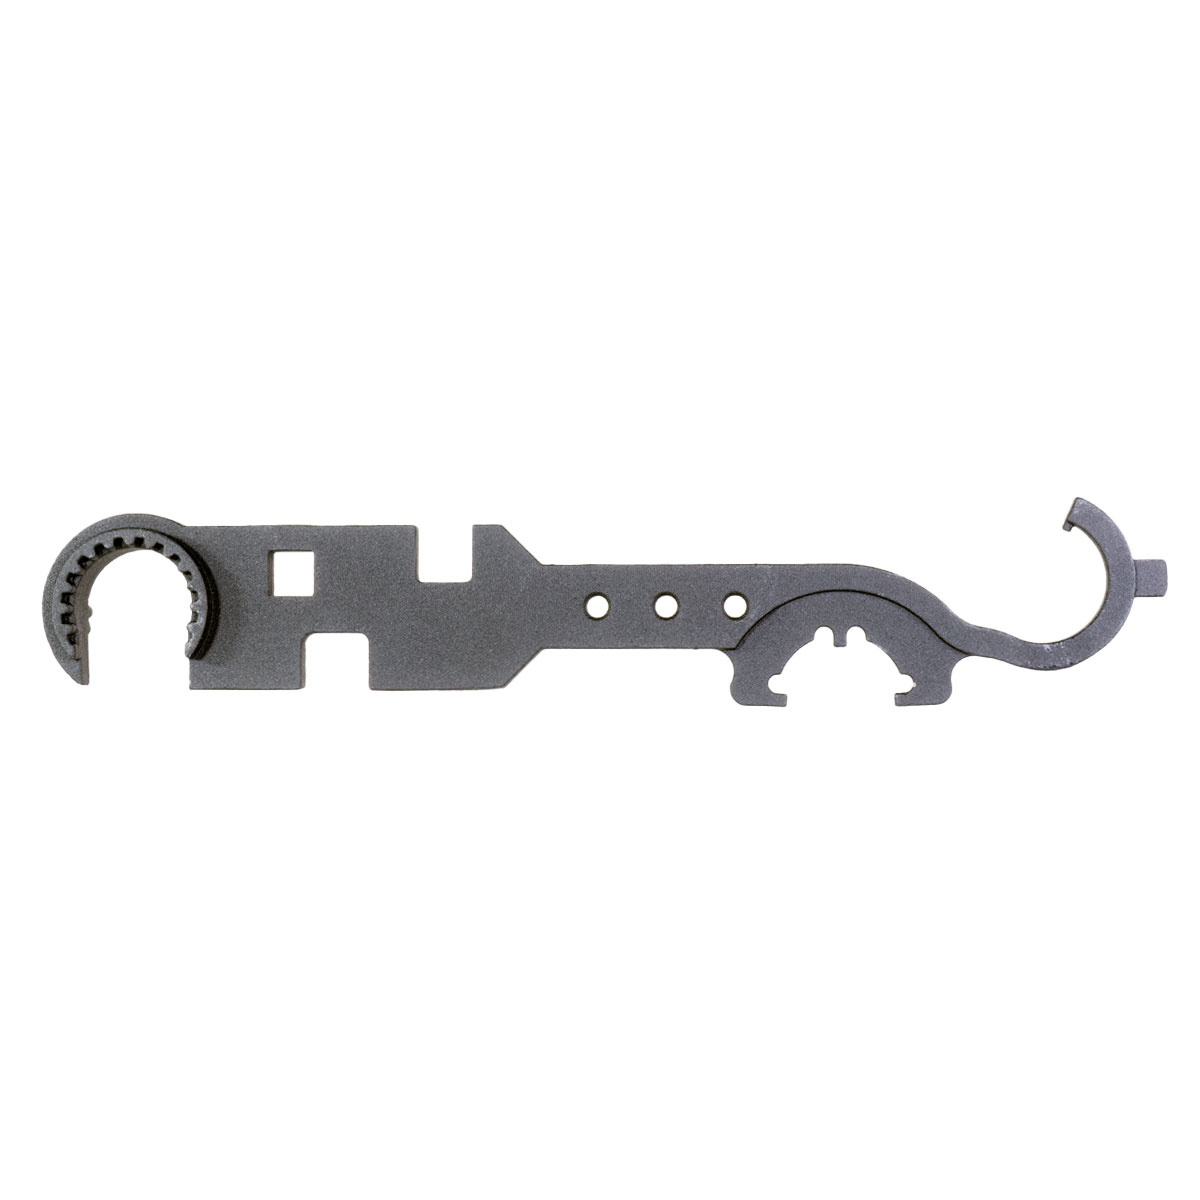 NcStar AR-15 Combo Armorer Wrench Tool